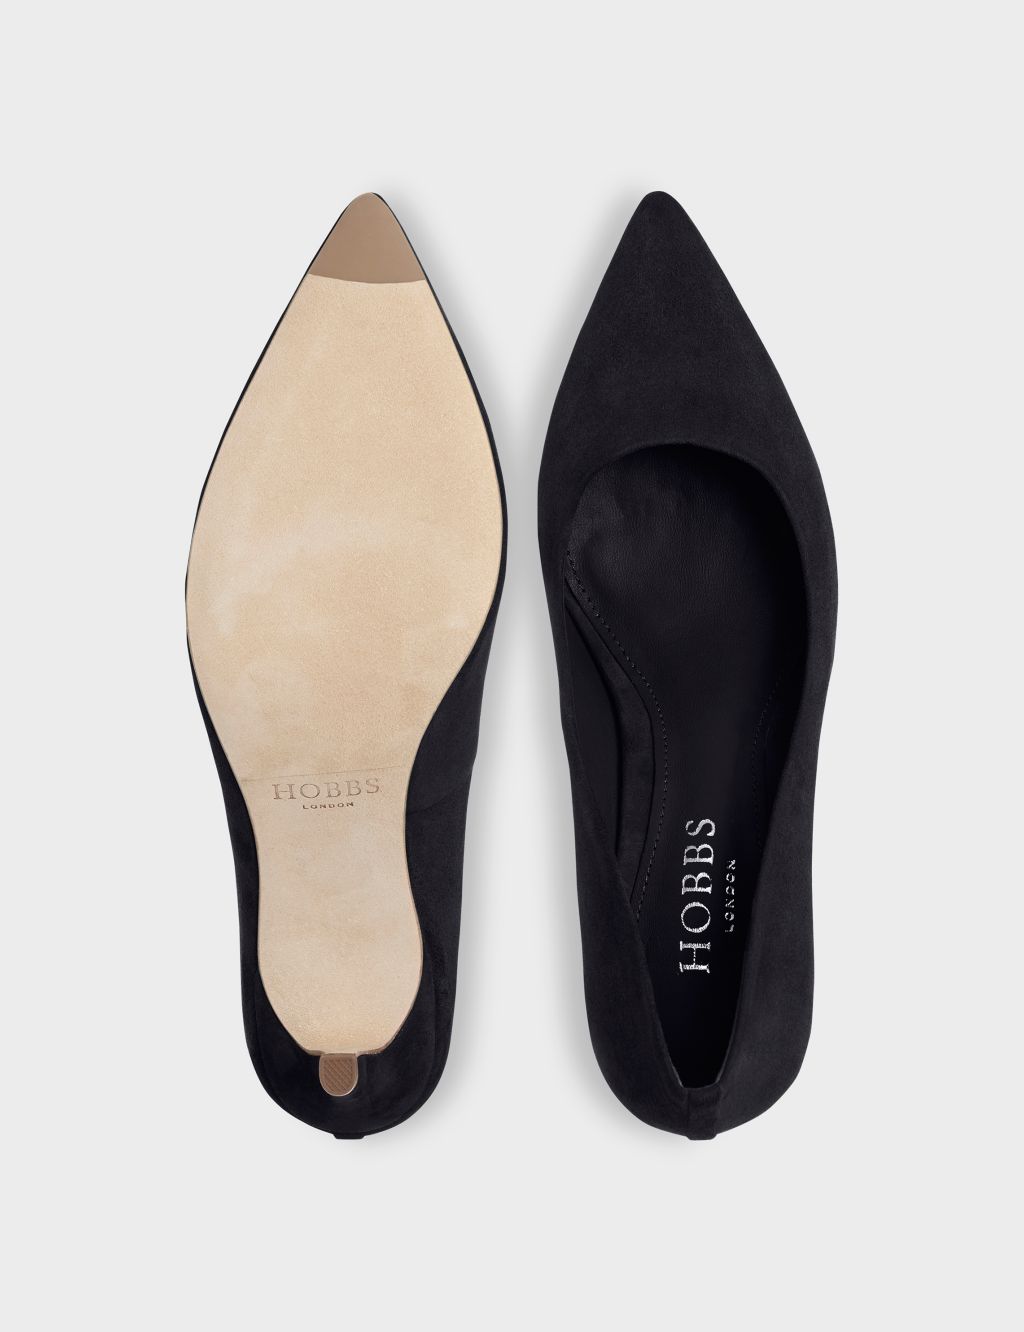 Suede Kitten Heel Pointed Court Shoes image 3